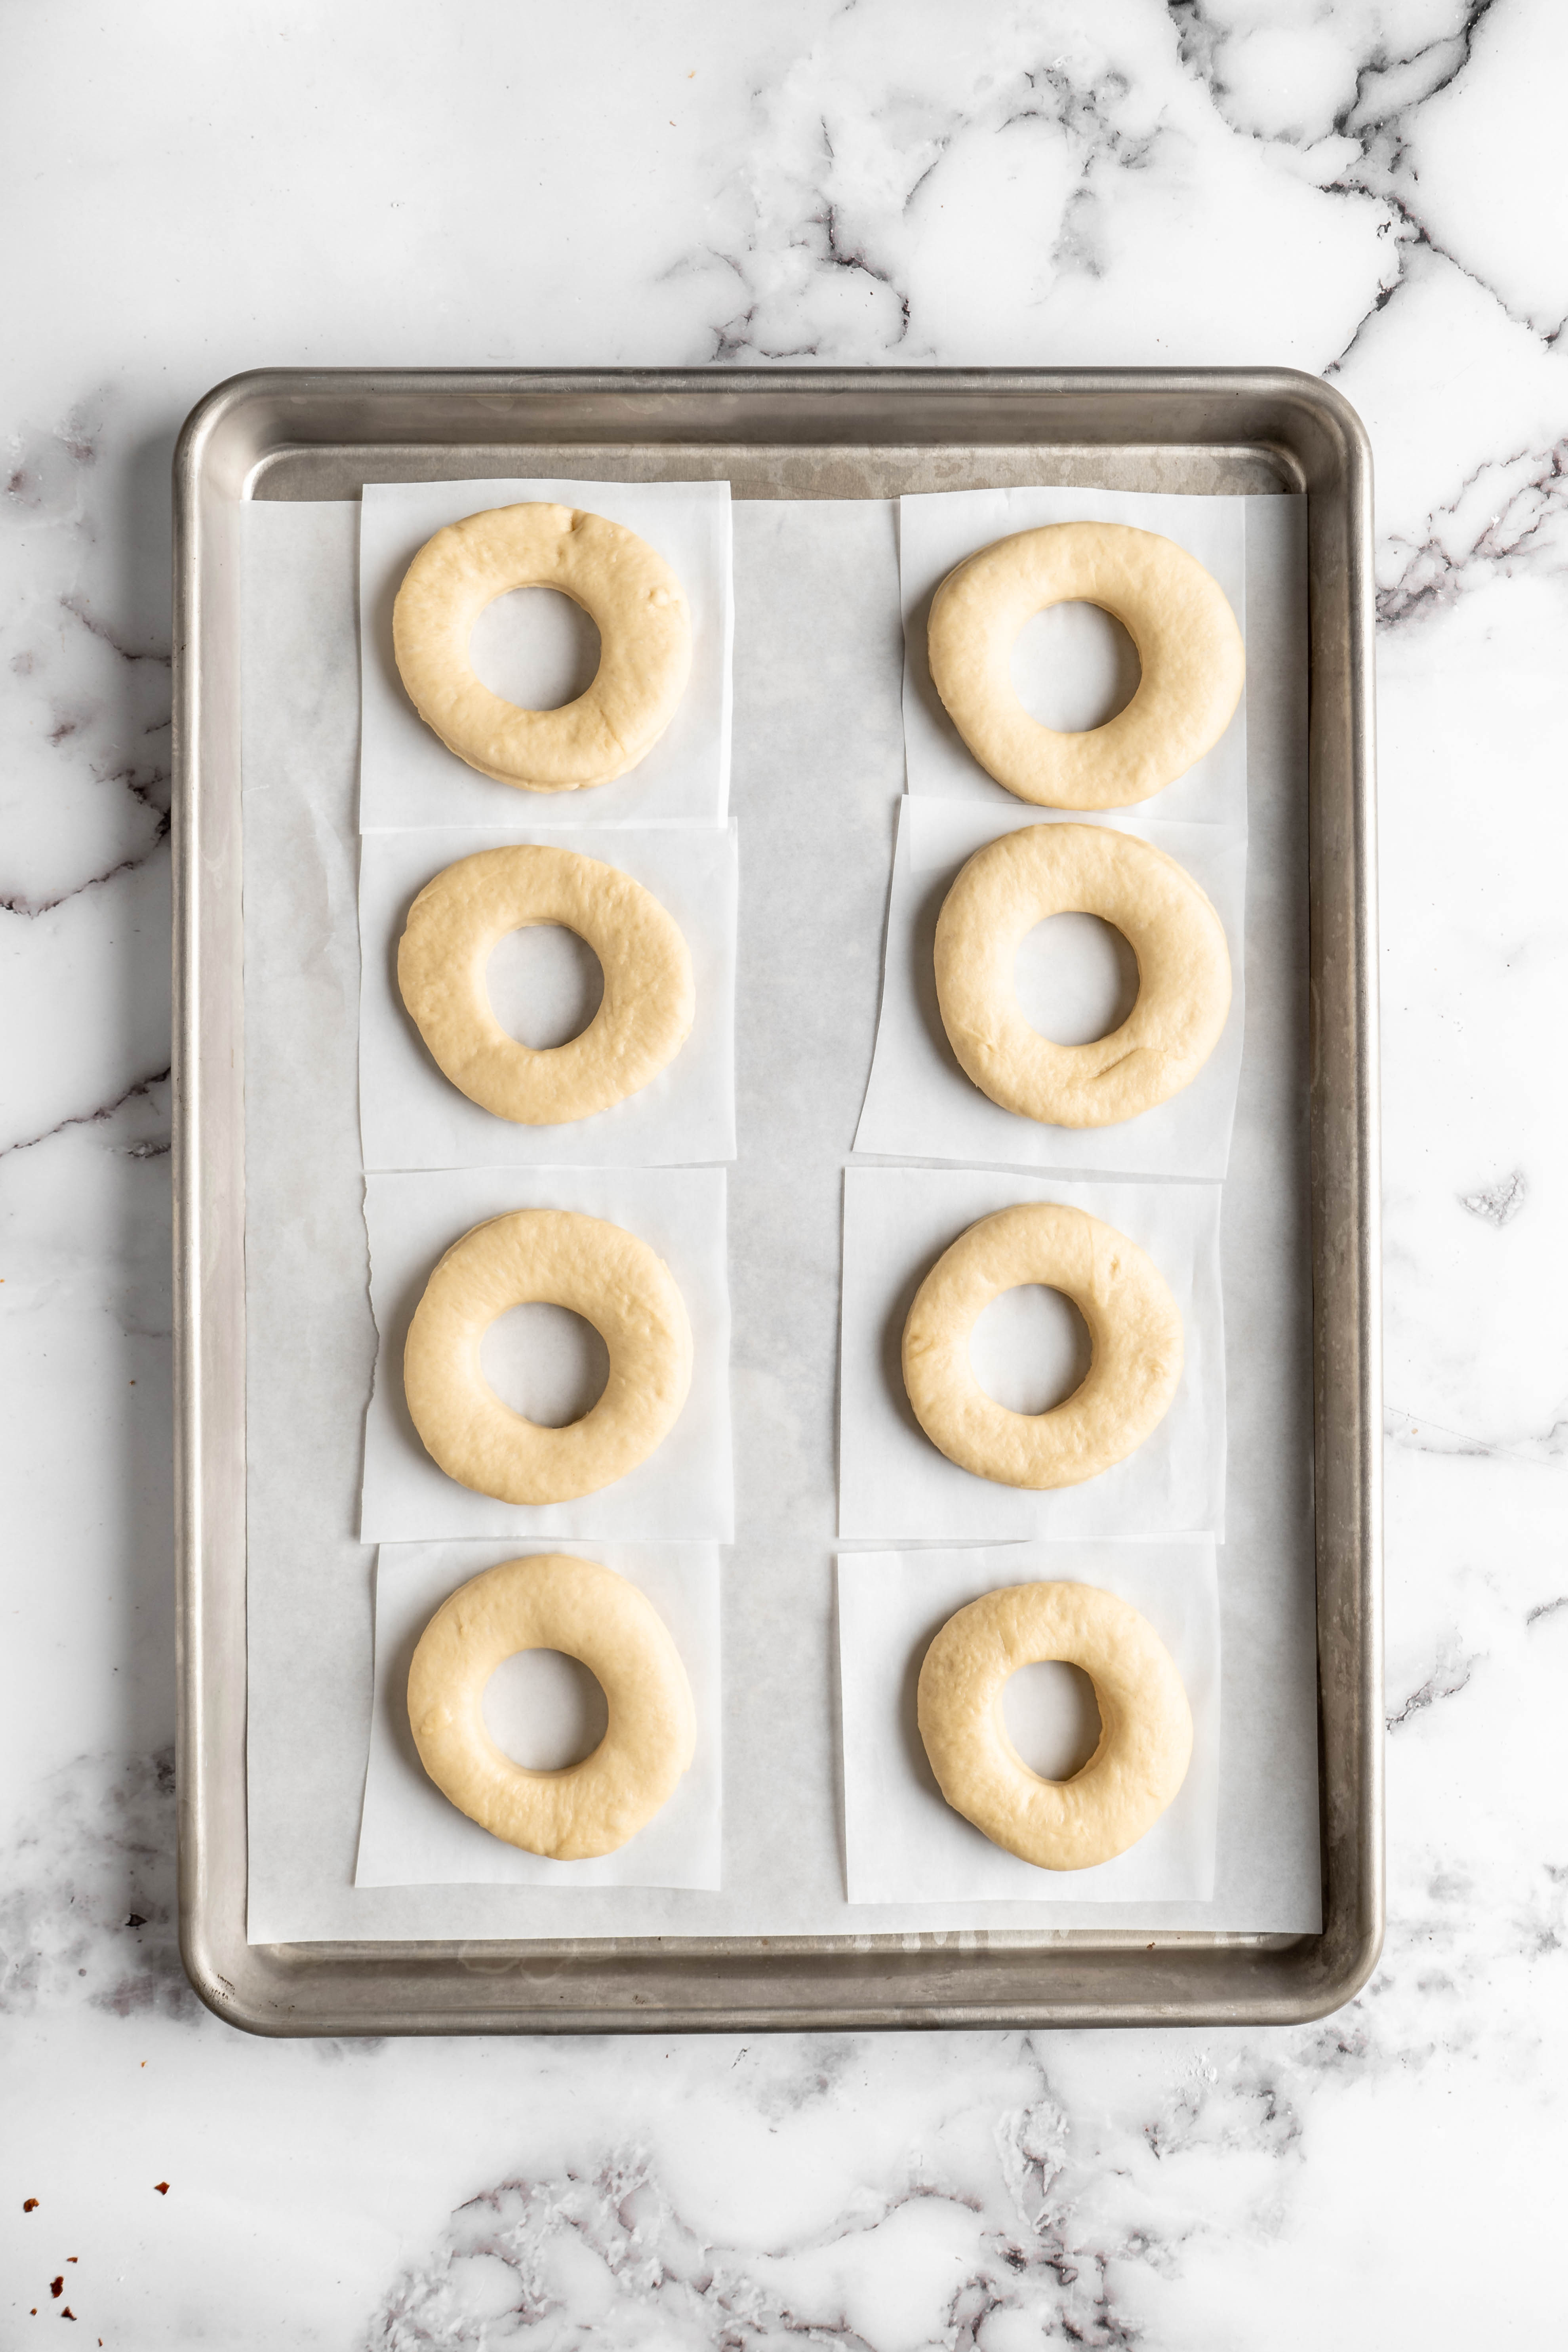 Uncooked donuts on parchment paper